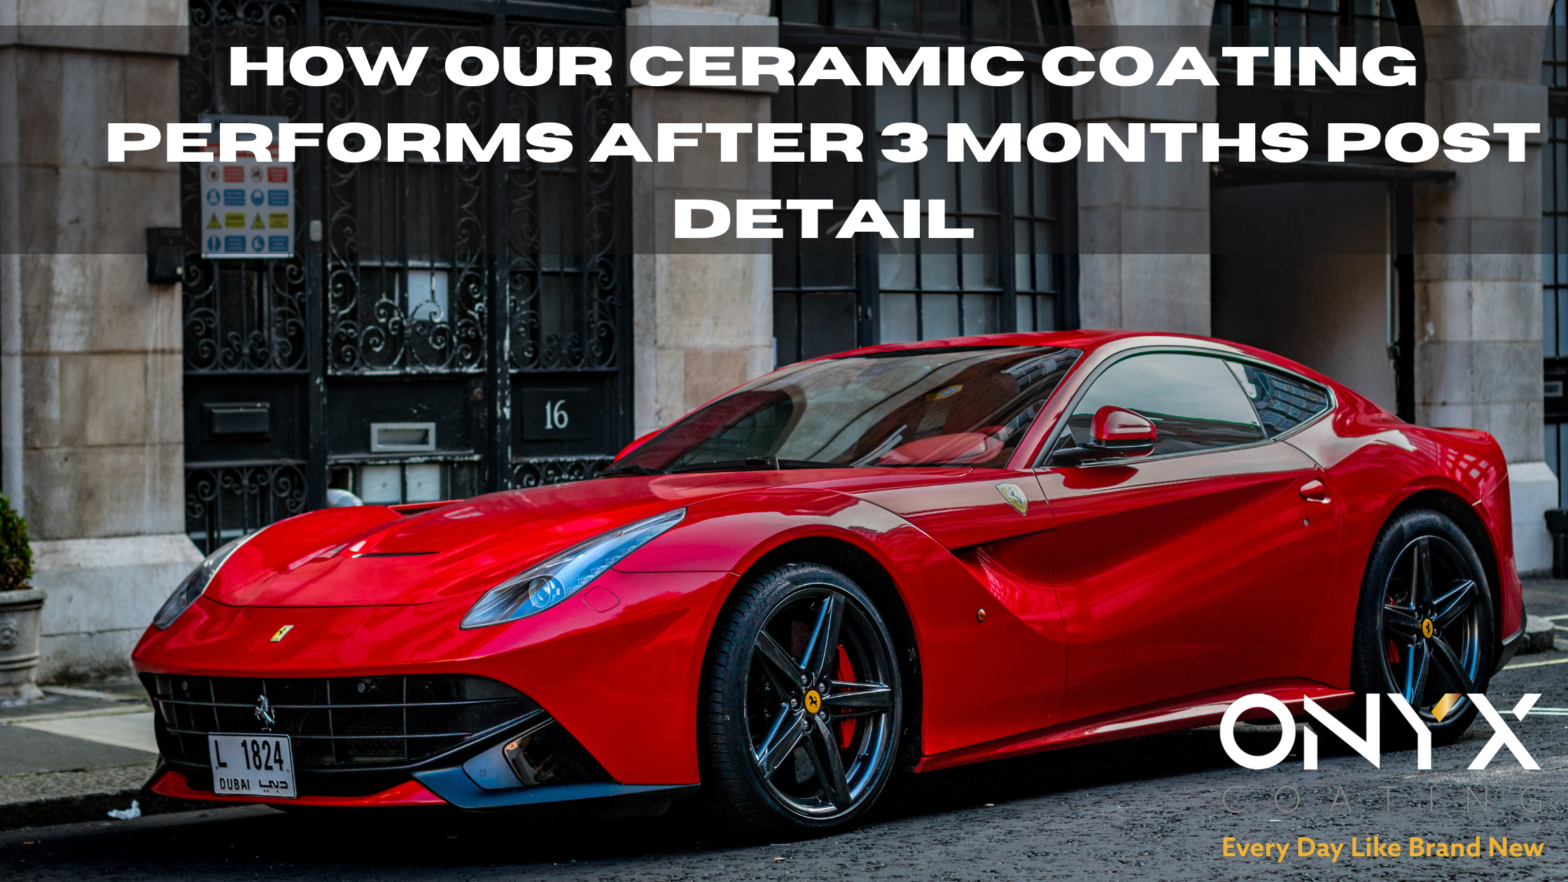 How our Ceramic Coating performs after 3 months post detail